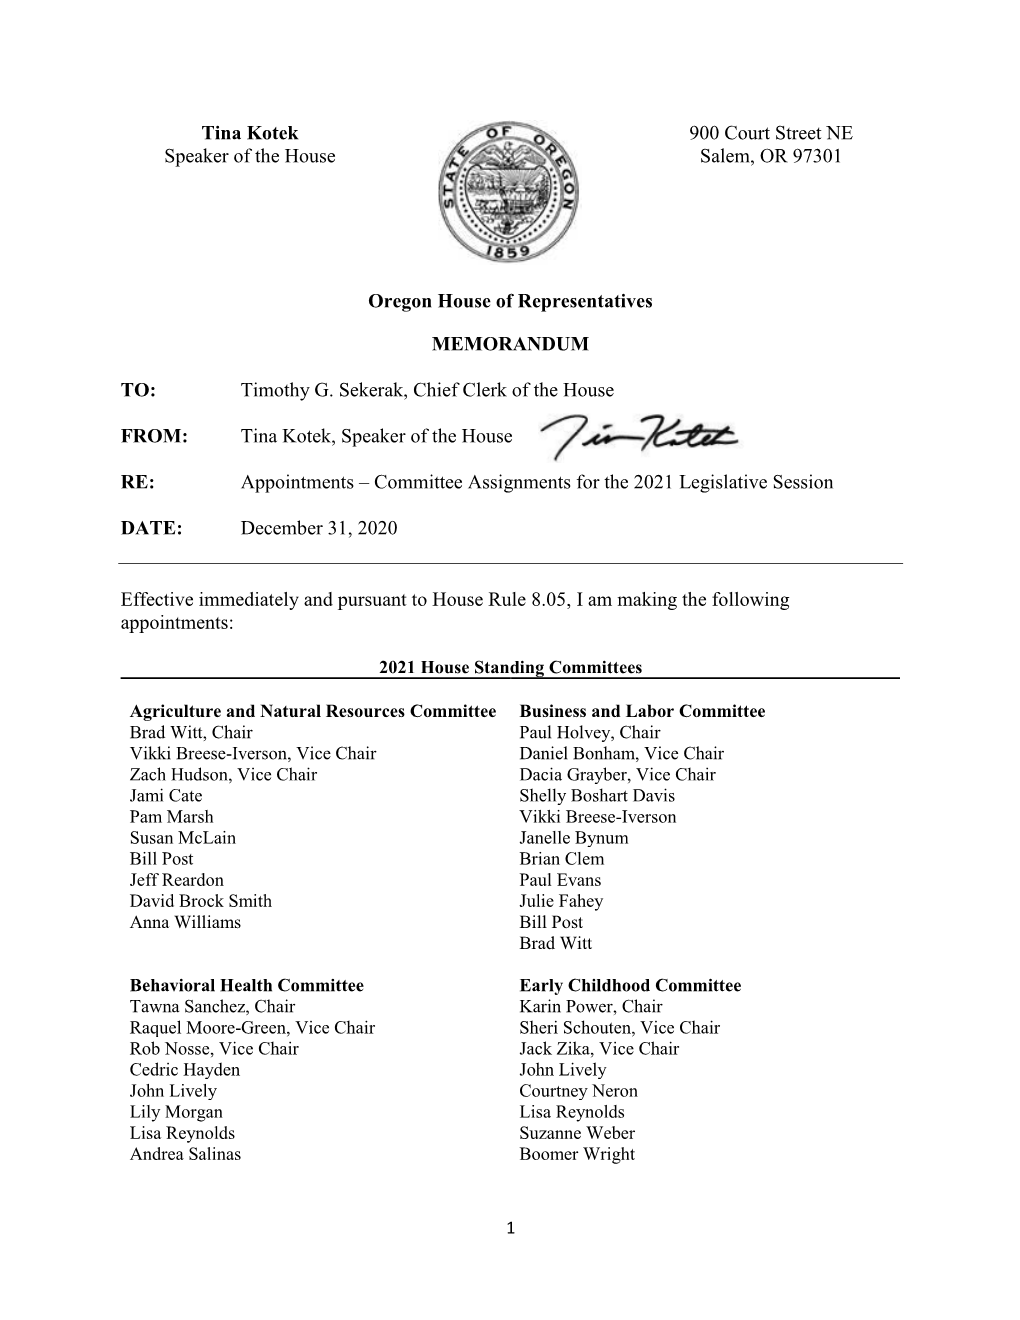 Committee Assignments for the 2021 Legislative Session